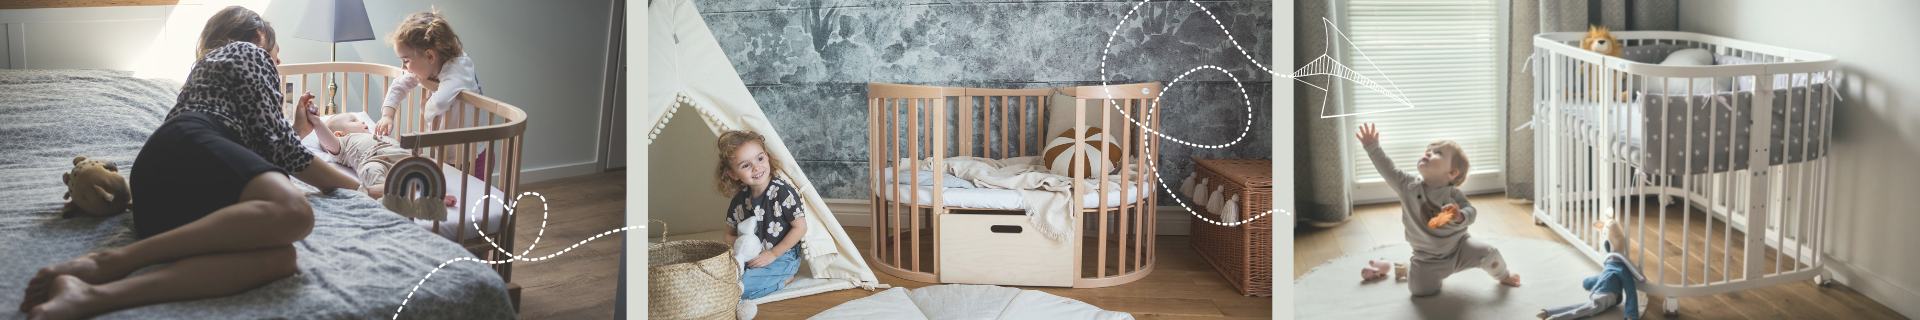 Waldin® baby beds that grows with your child!